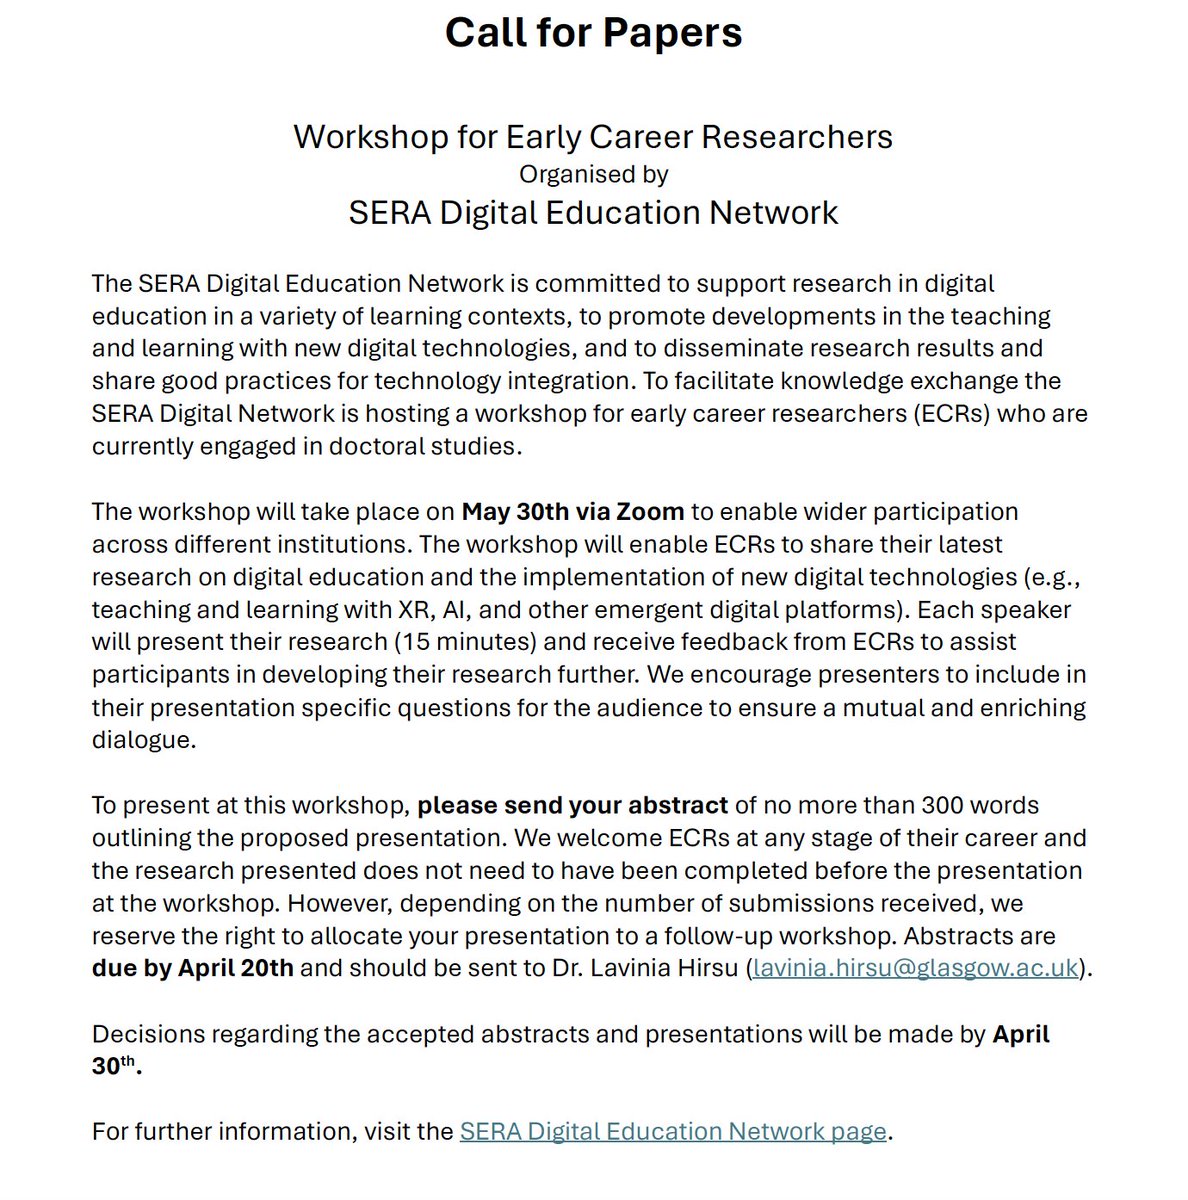 want to share your doctoral work on emerging digital technologies and practices? send us your proposal by April 20th @UofGEducation @SERA_Conference @DrRodolico @stnikou @ciliagr